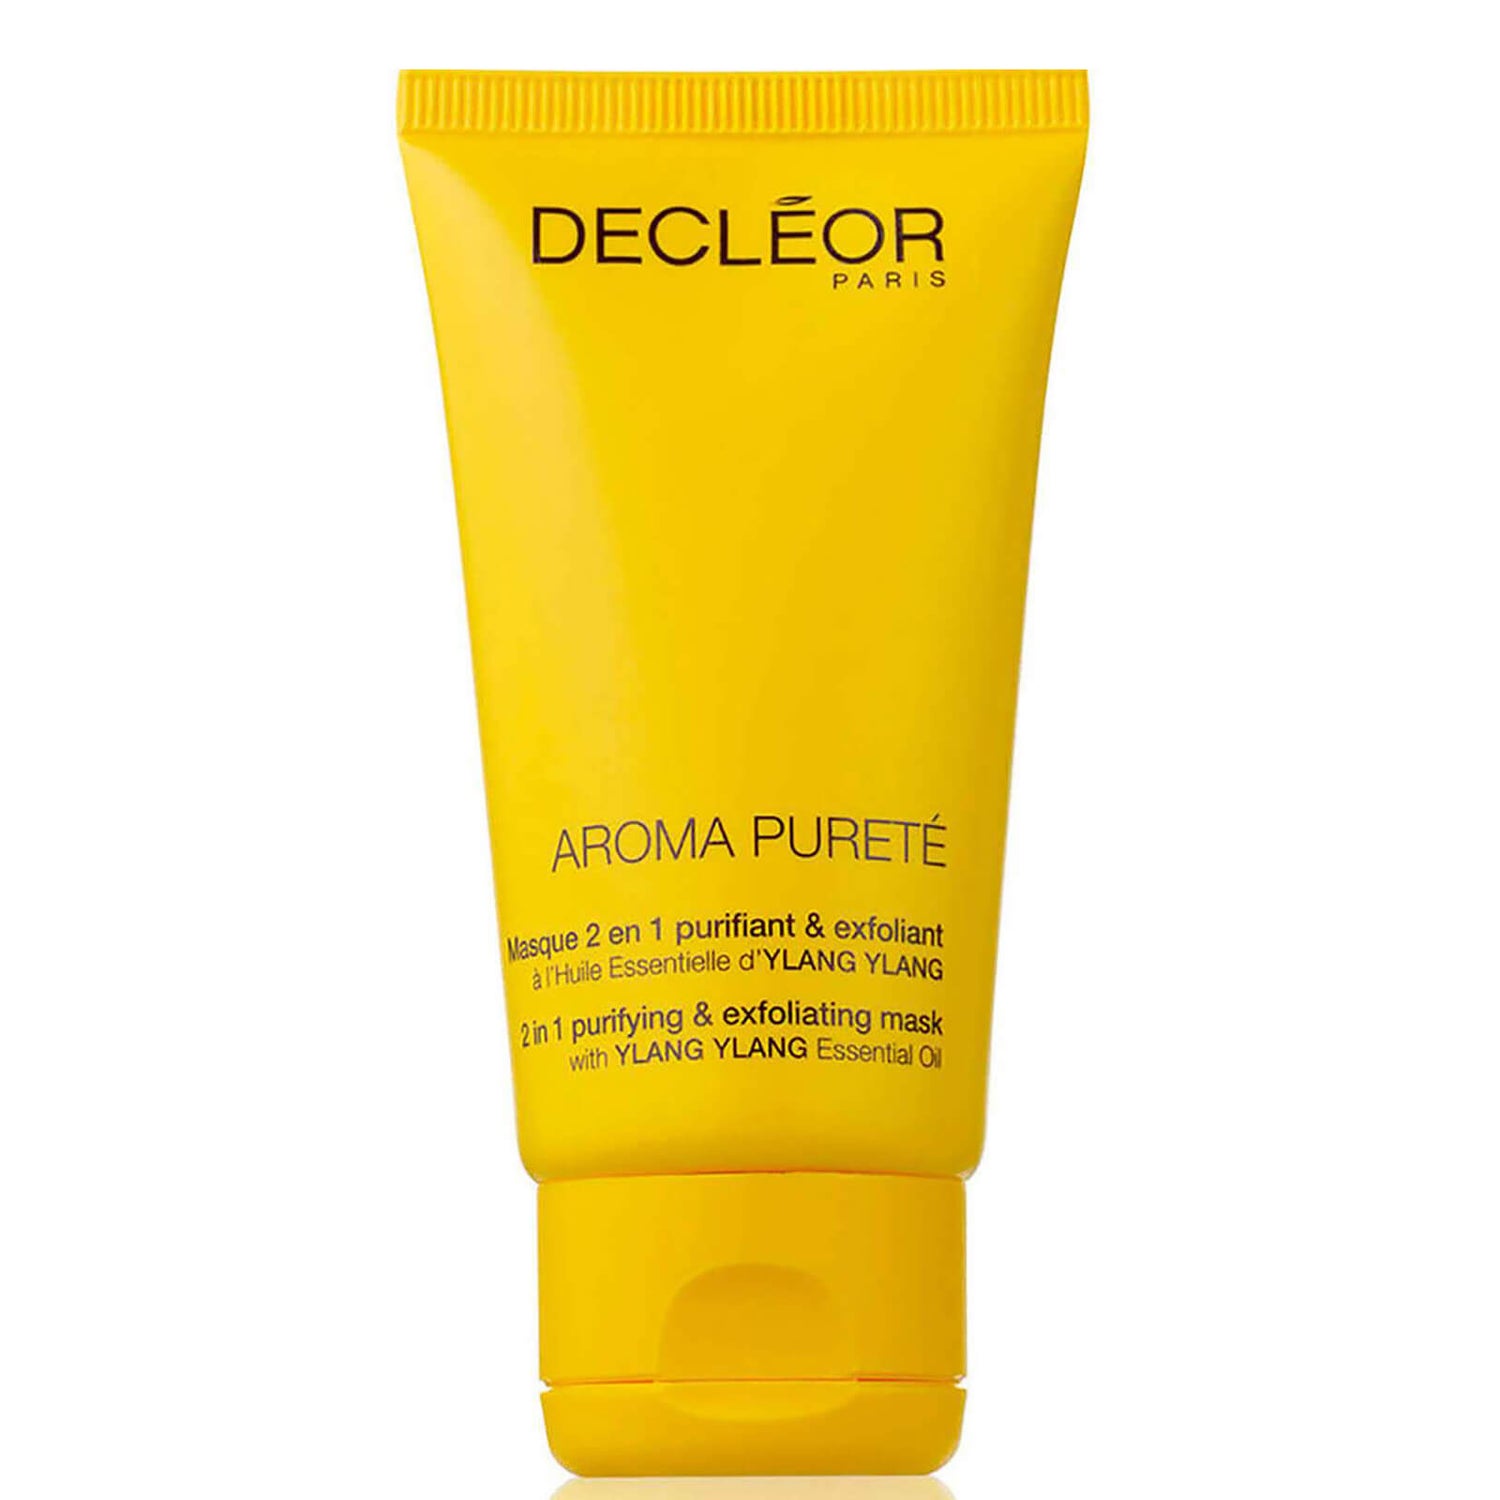 DECLÉOR Aroma Pureté 2 In 1 Purifying and Oxygenating Mask (50ml)